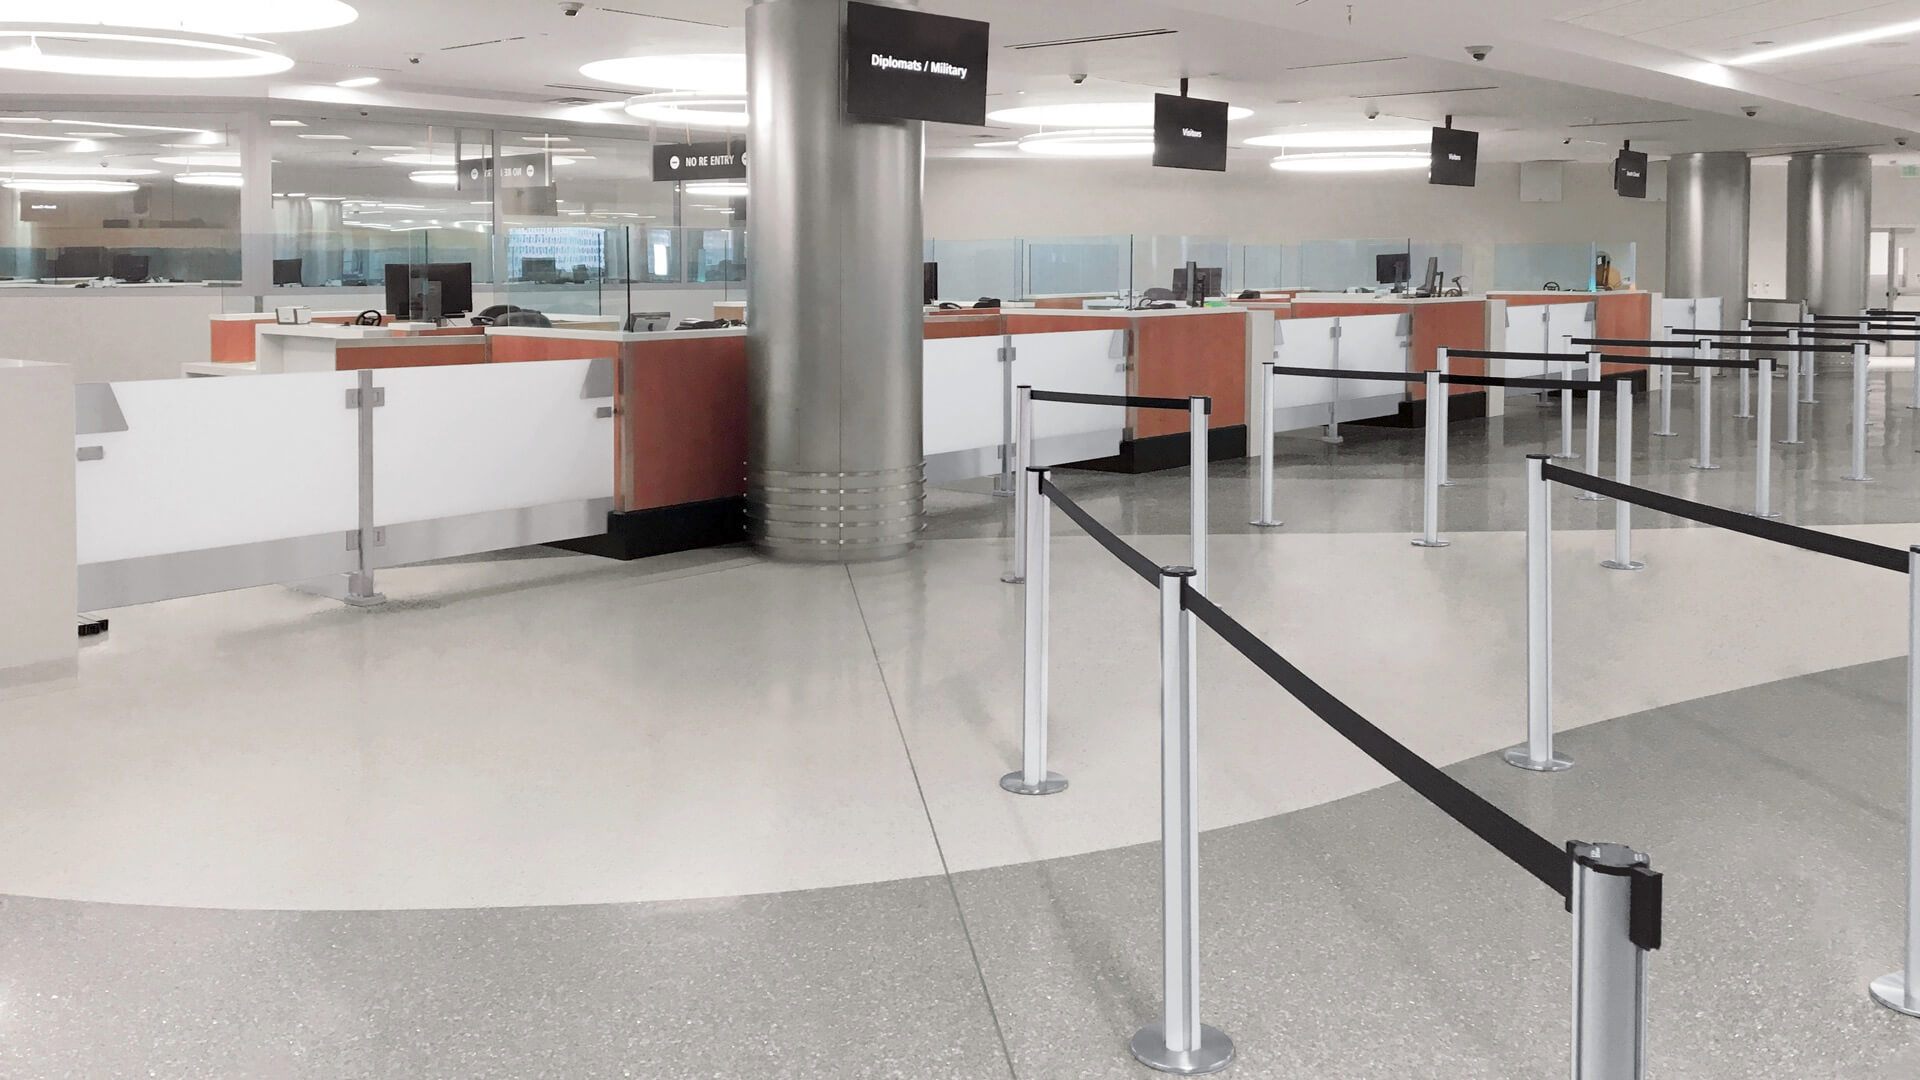 Airport,Queuing,Stanchions,MagneticBase,PartitionWall,Design/Architecture,Railings,GlassRailing,Security,Barriers